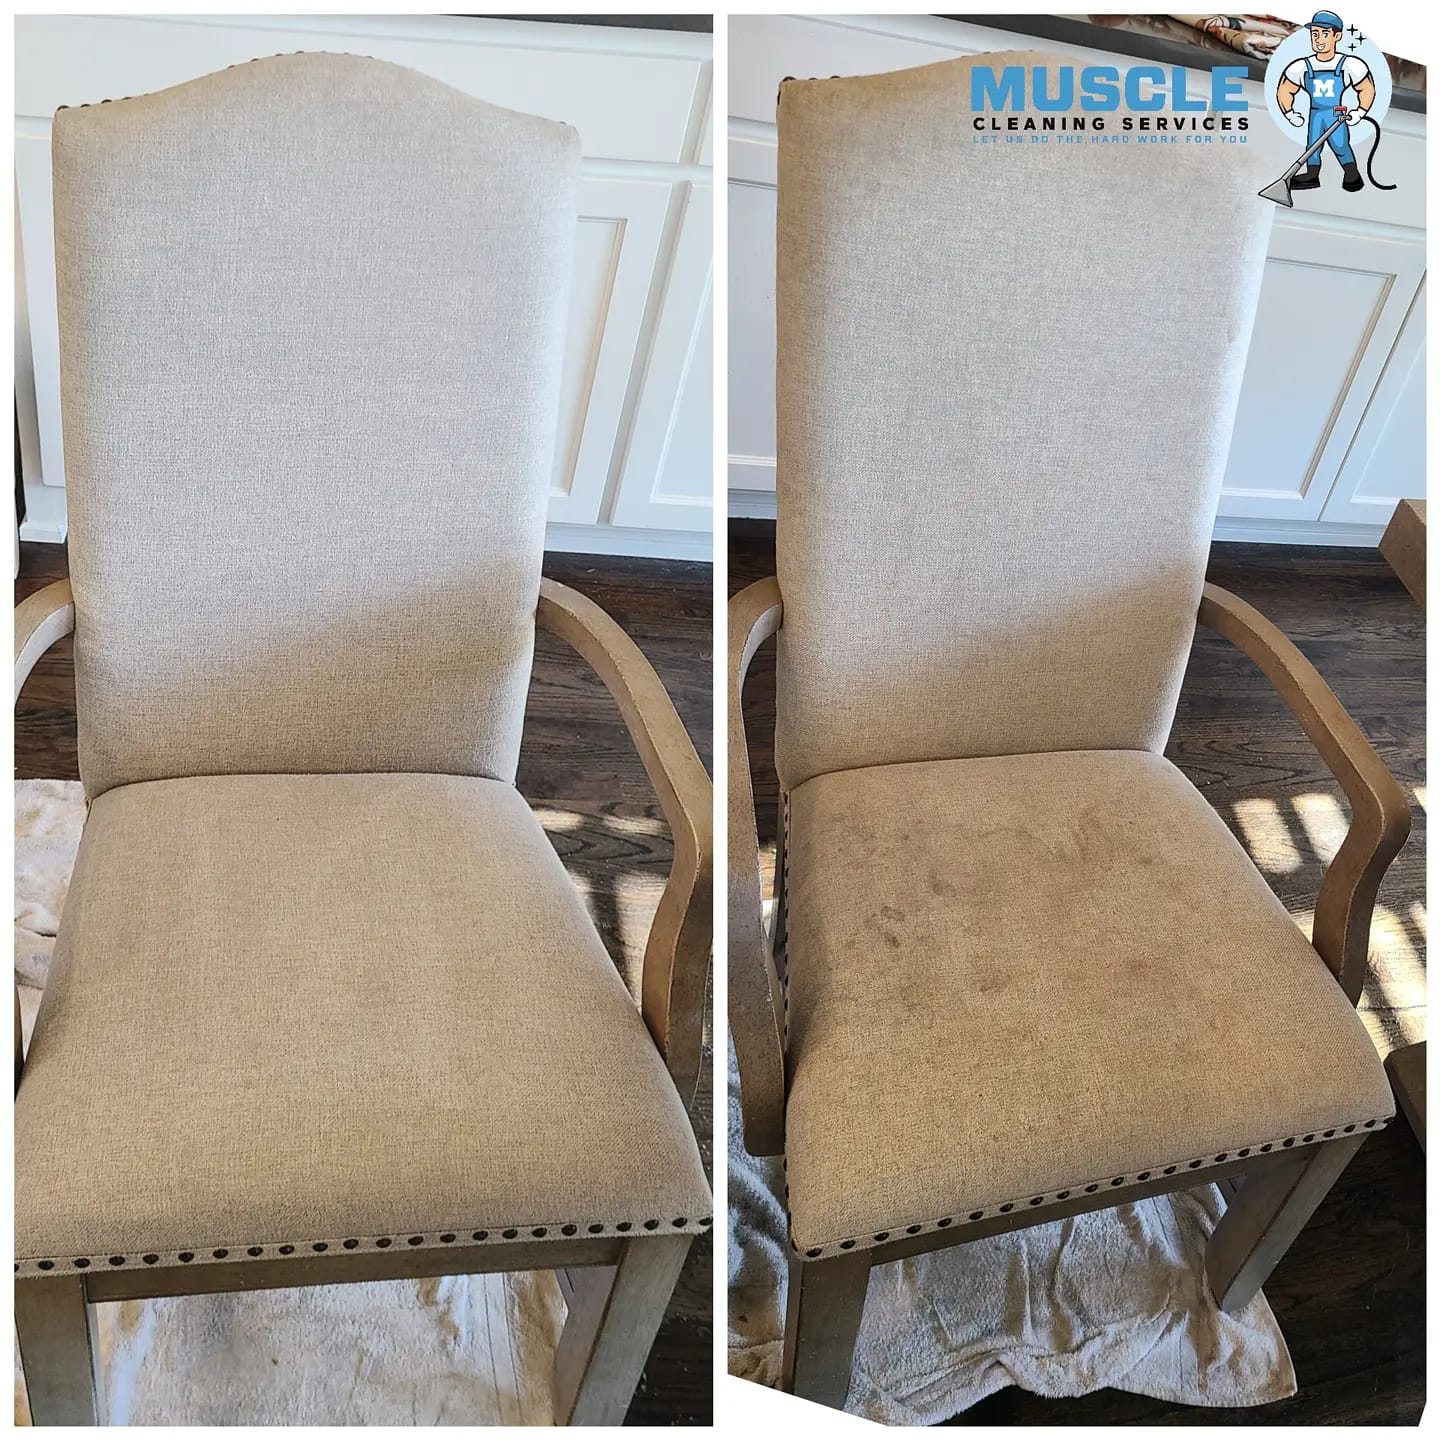 Muscle Cleaning Services - Stains on Chair